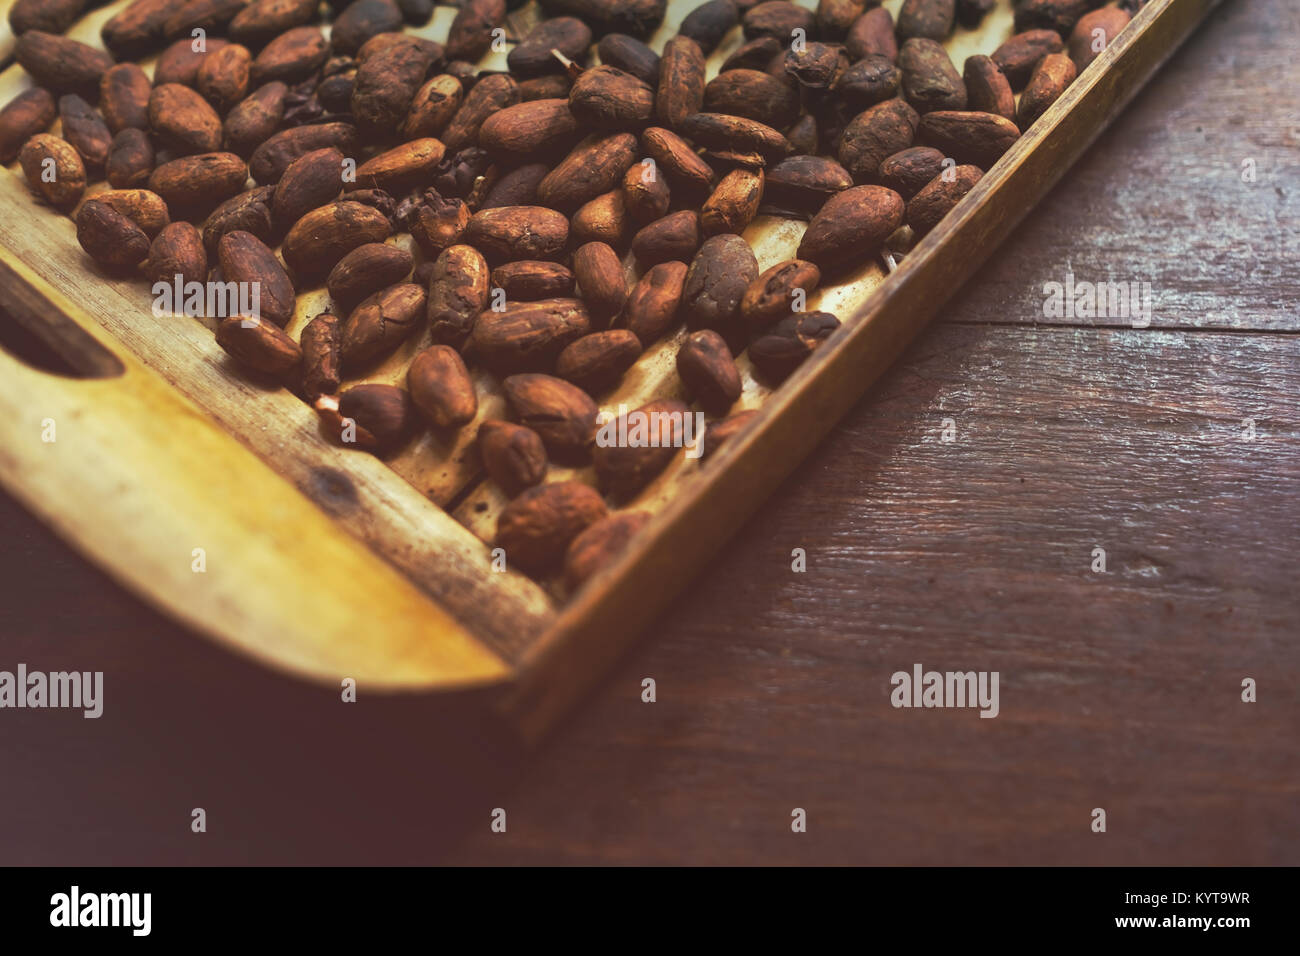 peeled cocoa bean on wooden surface Stock Photo